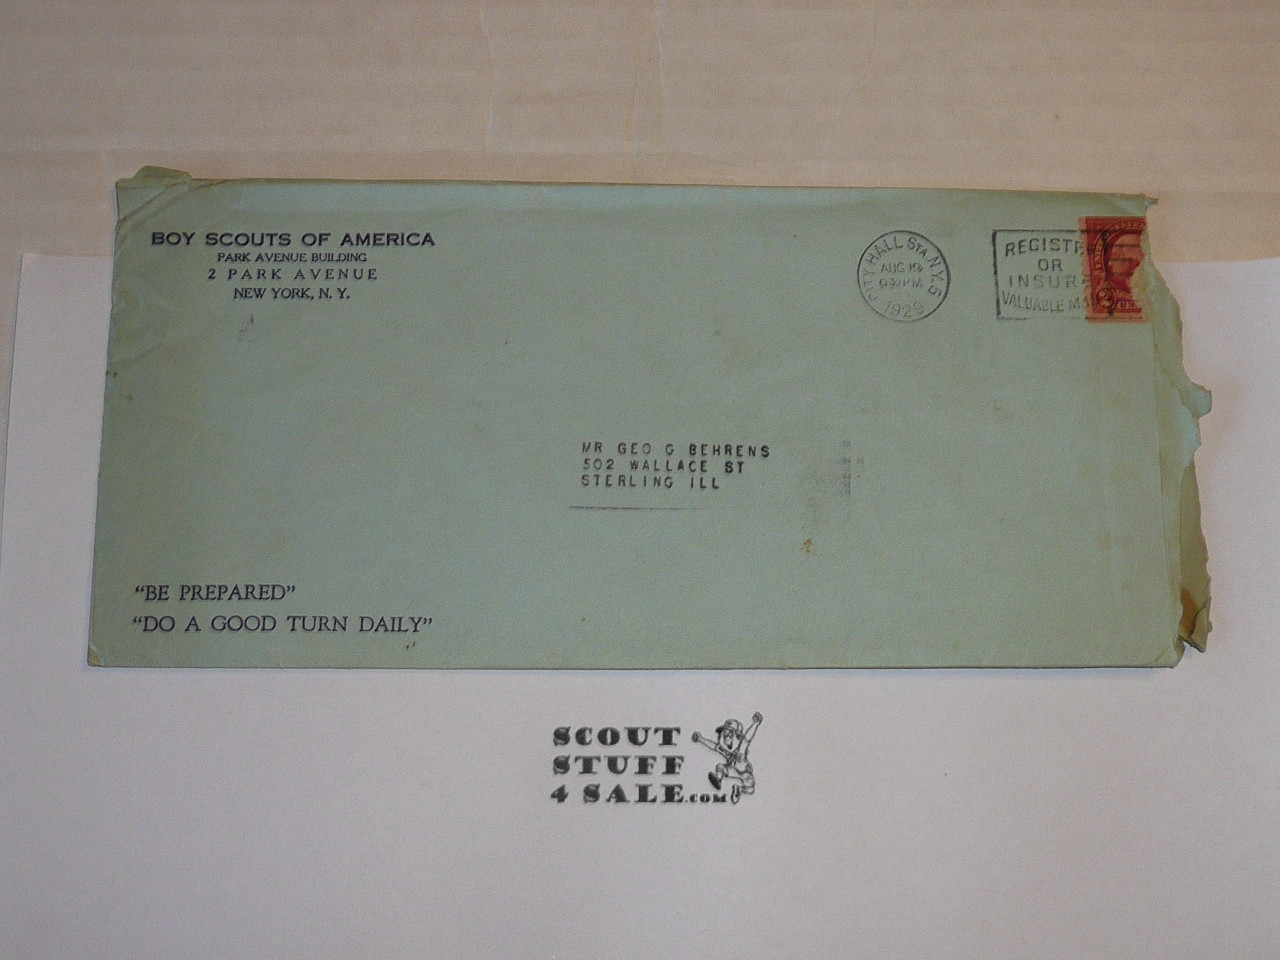 1929 World Jamboree, USA Contingent Home Folks Letter #5 from George Fisher on National BSA Letterhead, with envelope